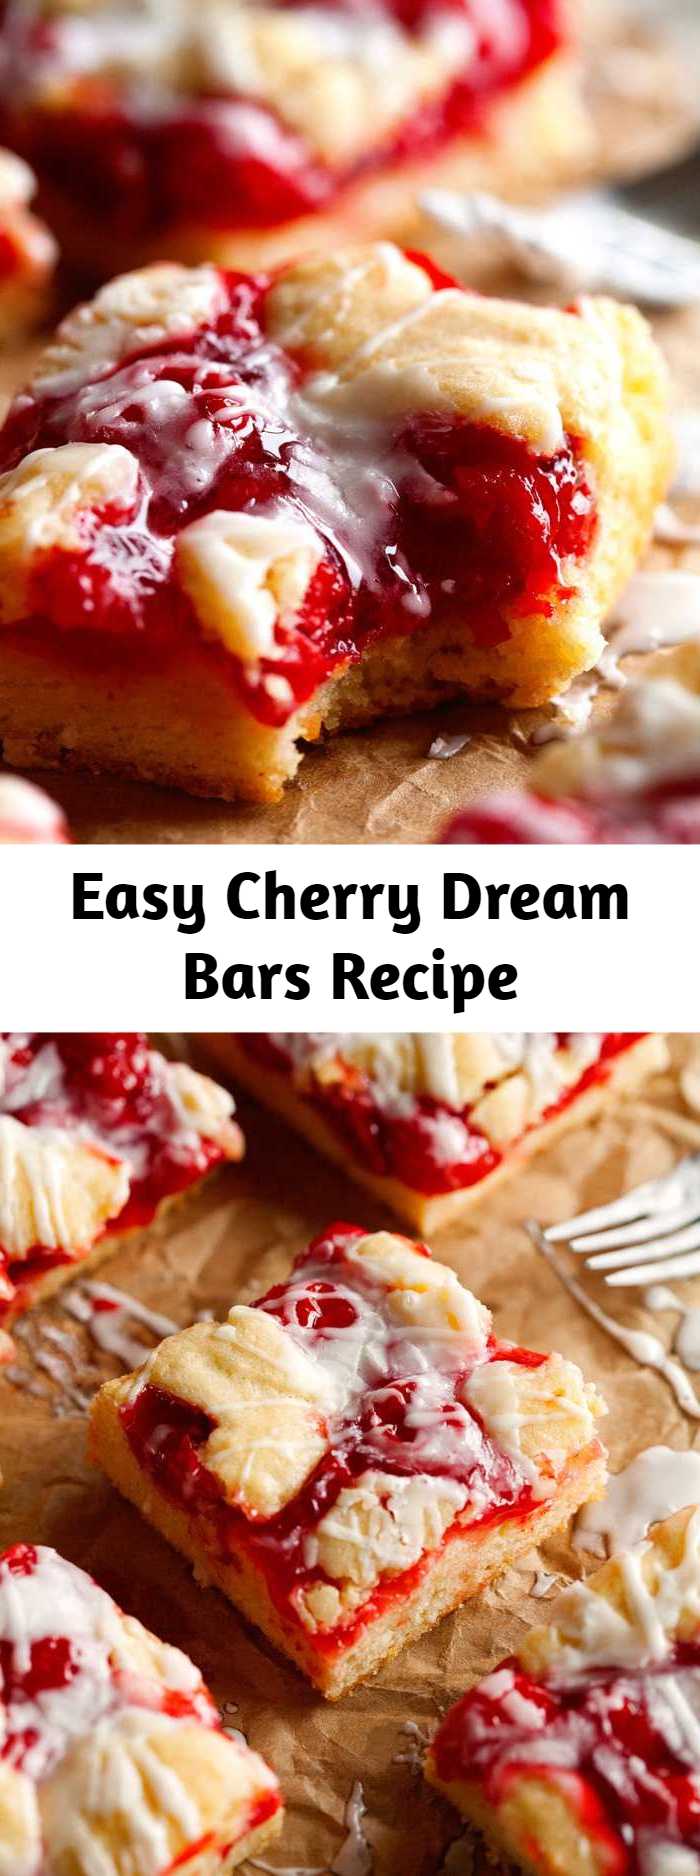 Easy Cherry Dream Bars Recipe - Not only does it require less than 10 minutes of active time to make these, but you’ll likely have everything you need already in your pantry. I like to work with simple ingredients to make some scrumptious recipes that are filled with flavor. Perfectly suitable to feed a crowd or just a couple of people – these bars are definitely no exception!